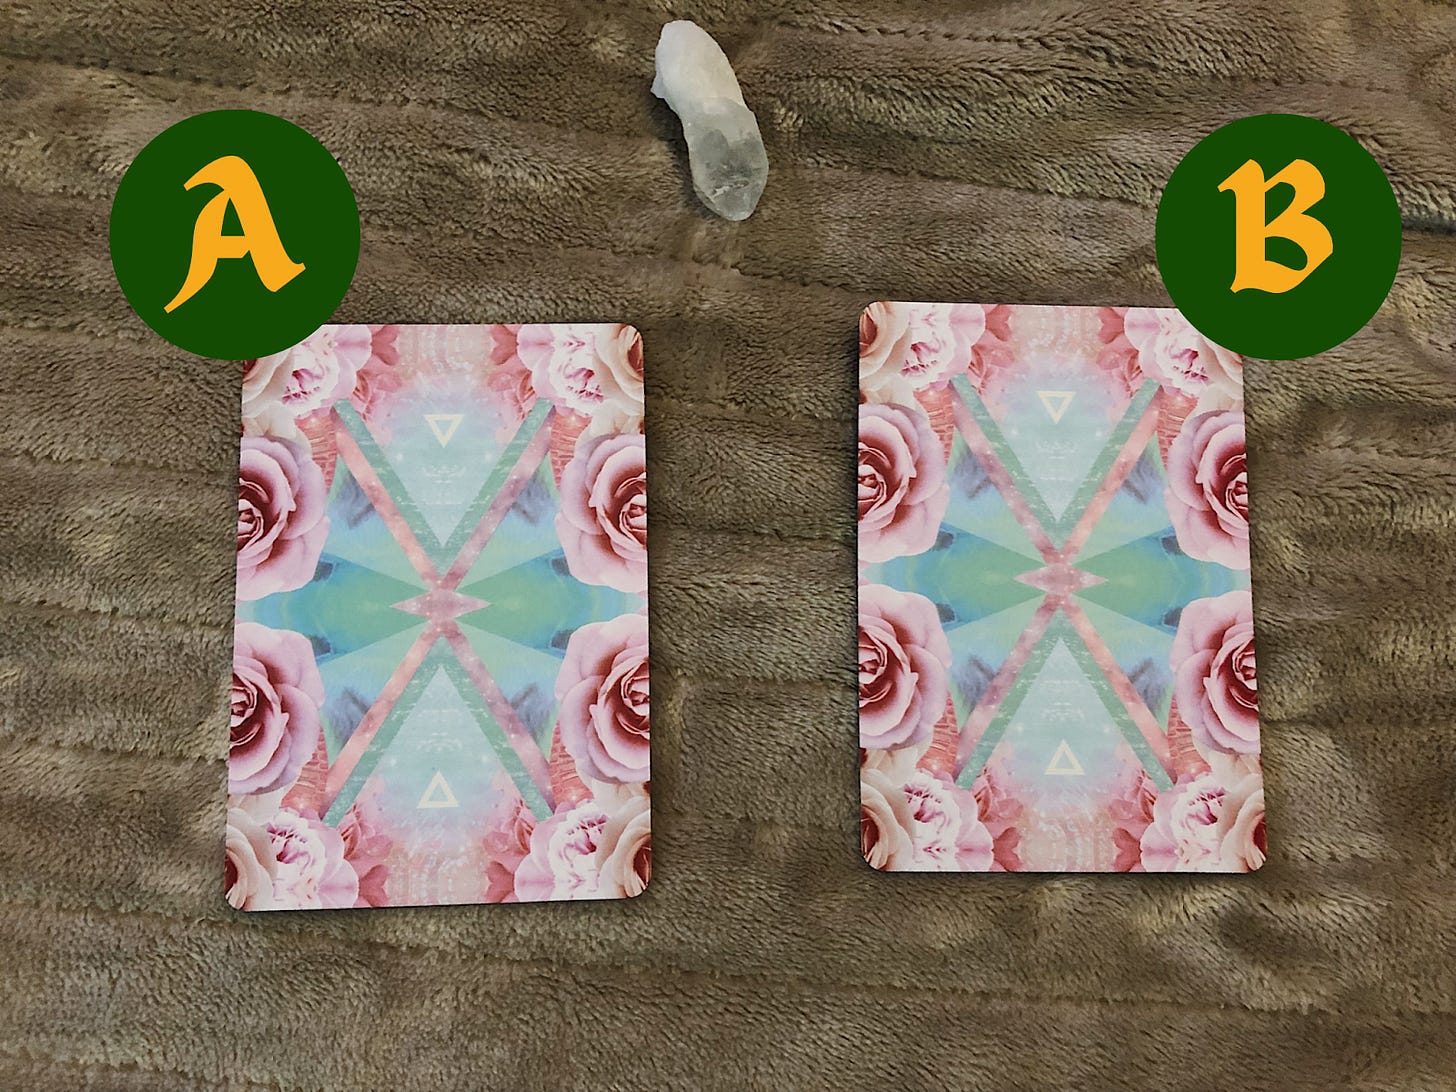 Two pastel colored oracle cards face down with an "A" on the left card, and "B" on the card on the right. Both cards are sitting on a heated beige blanket with a clear crystal between them both